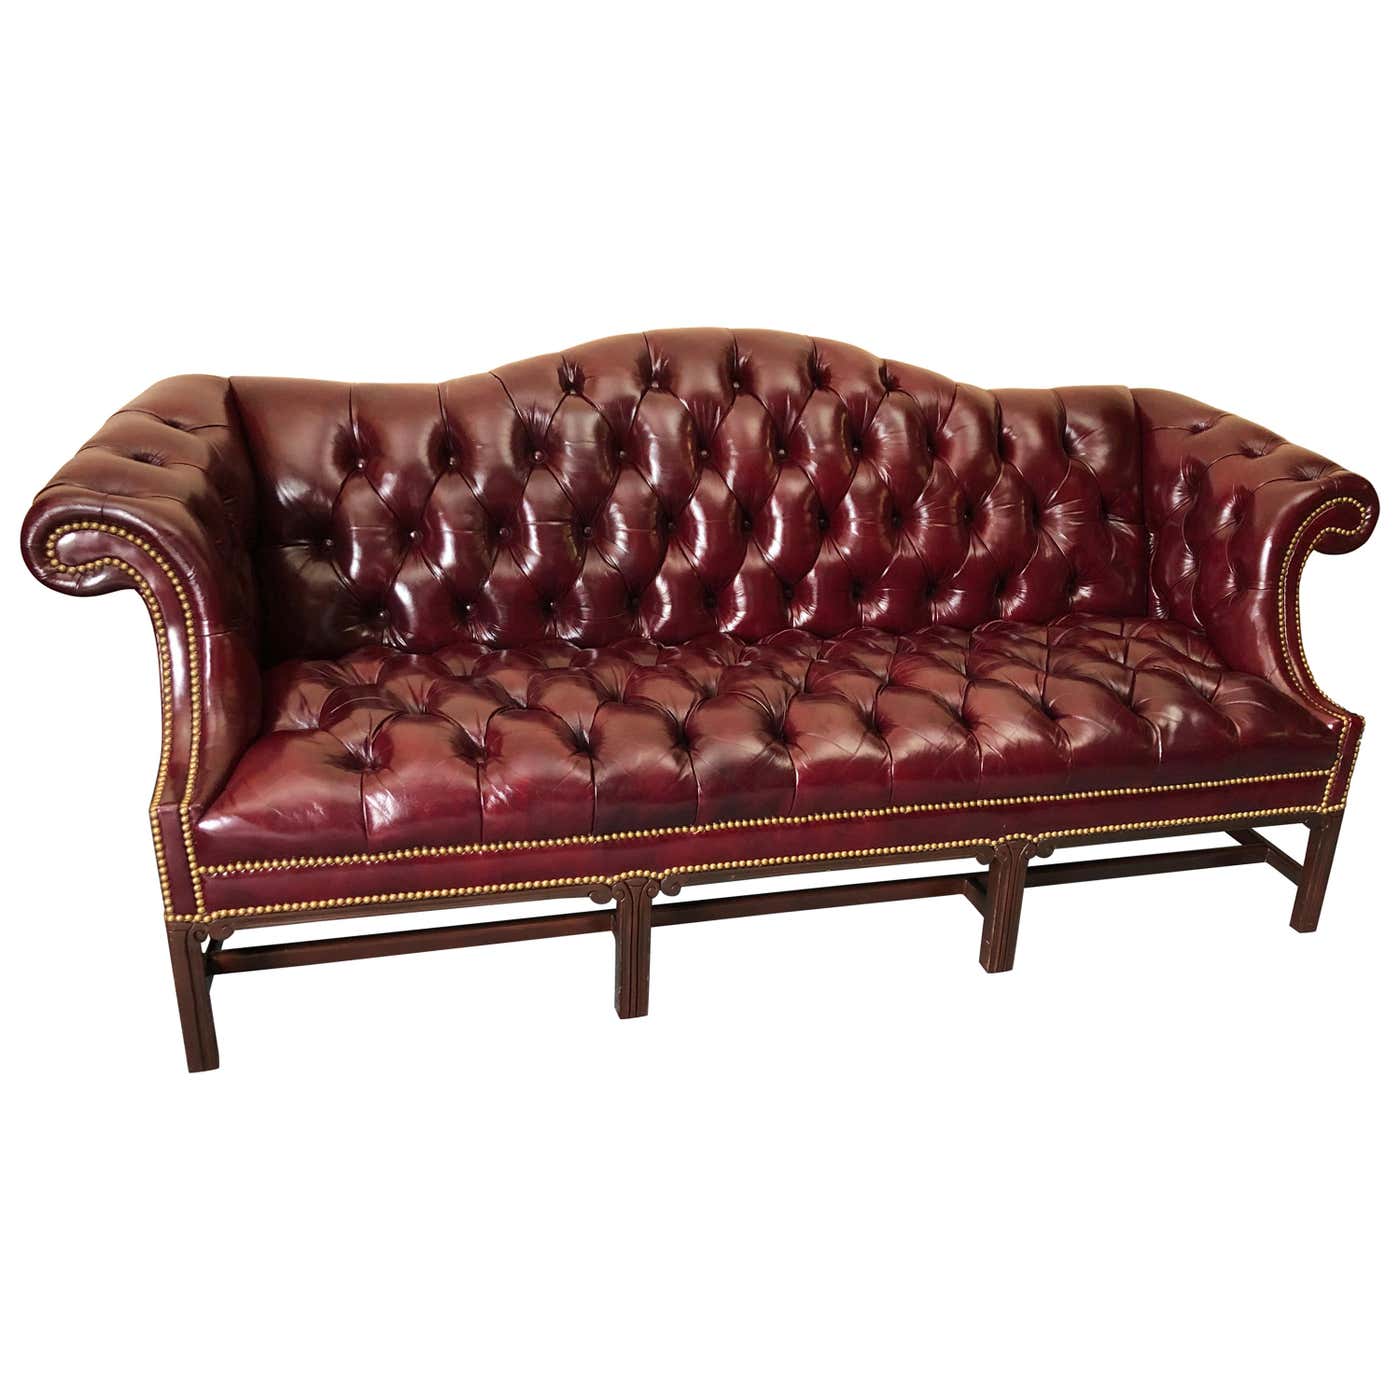 Super Luxurious Hancock and Moore Maroon Tufted Leather Chesterfield ...